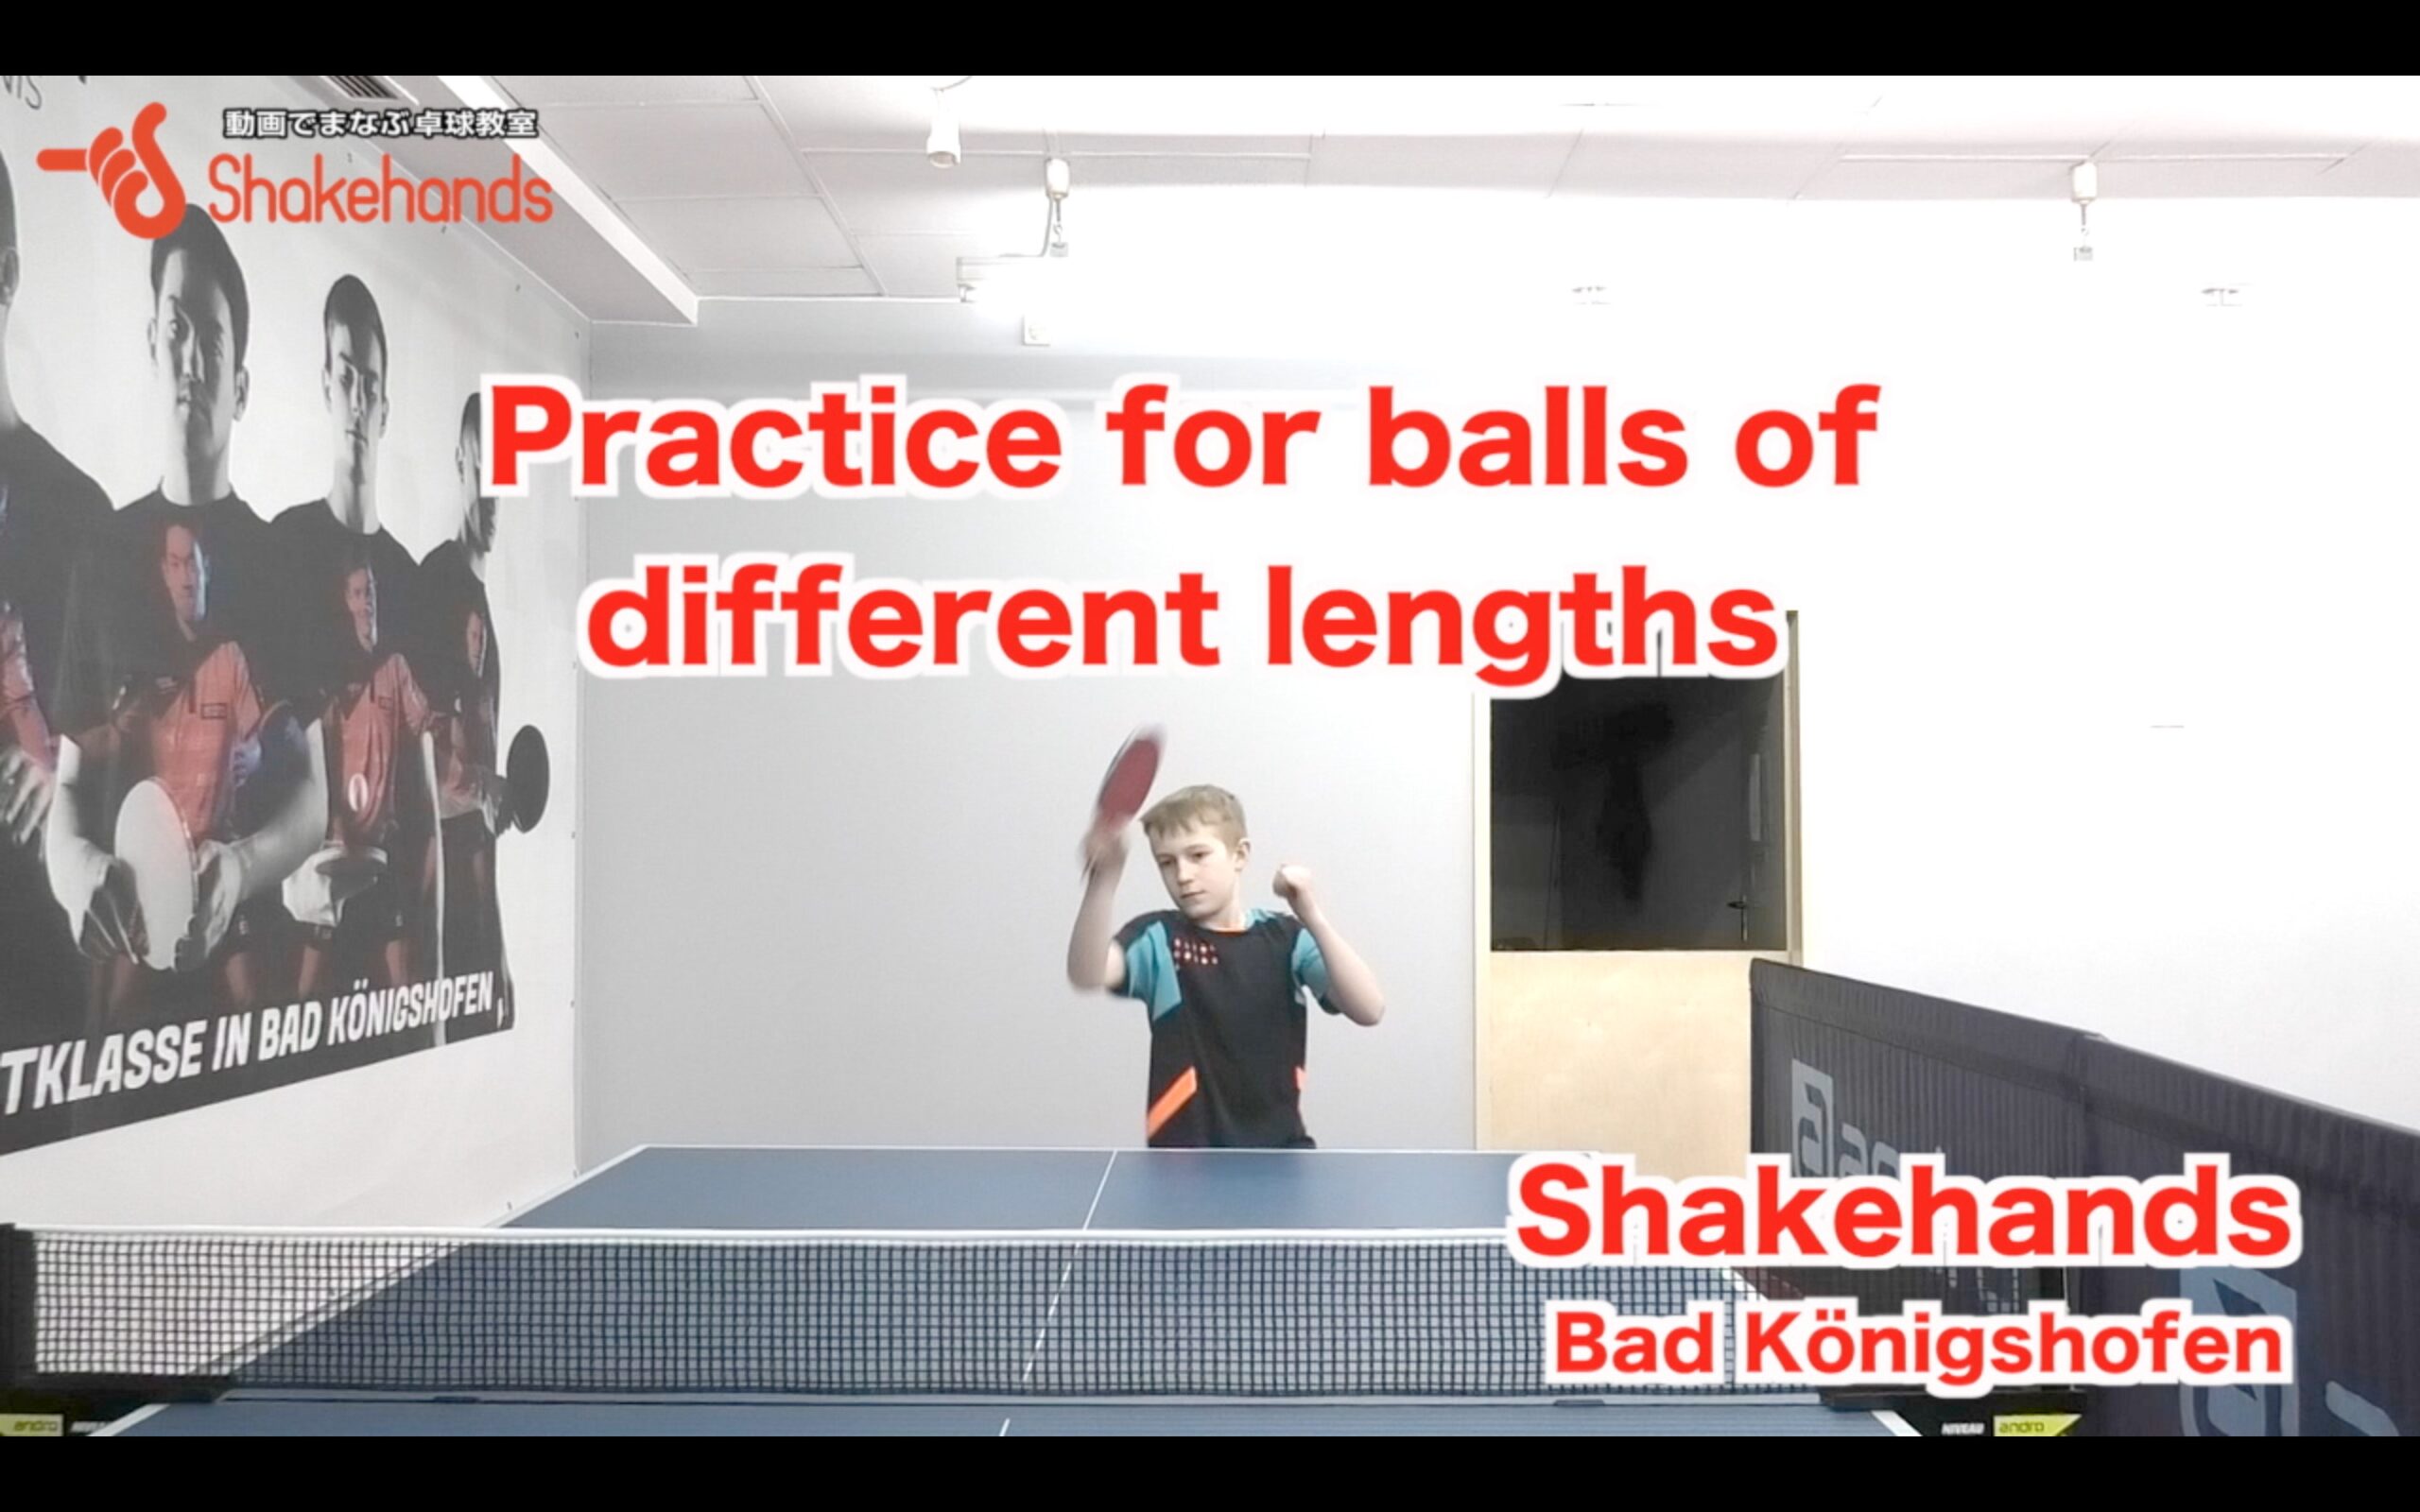 Practice for balls of different lengths